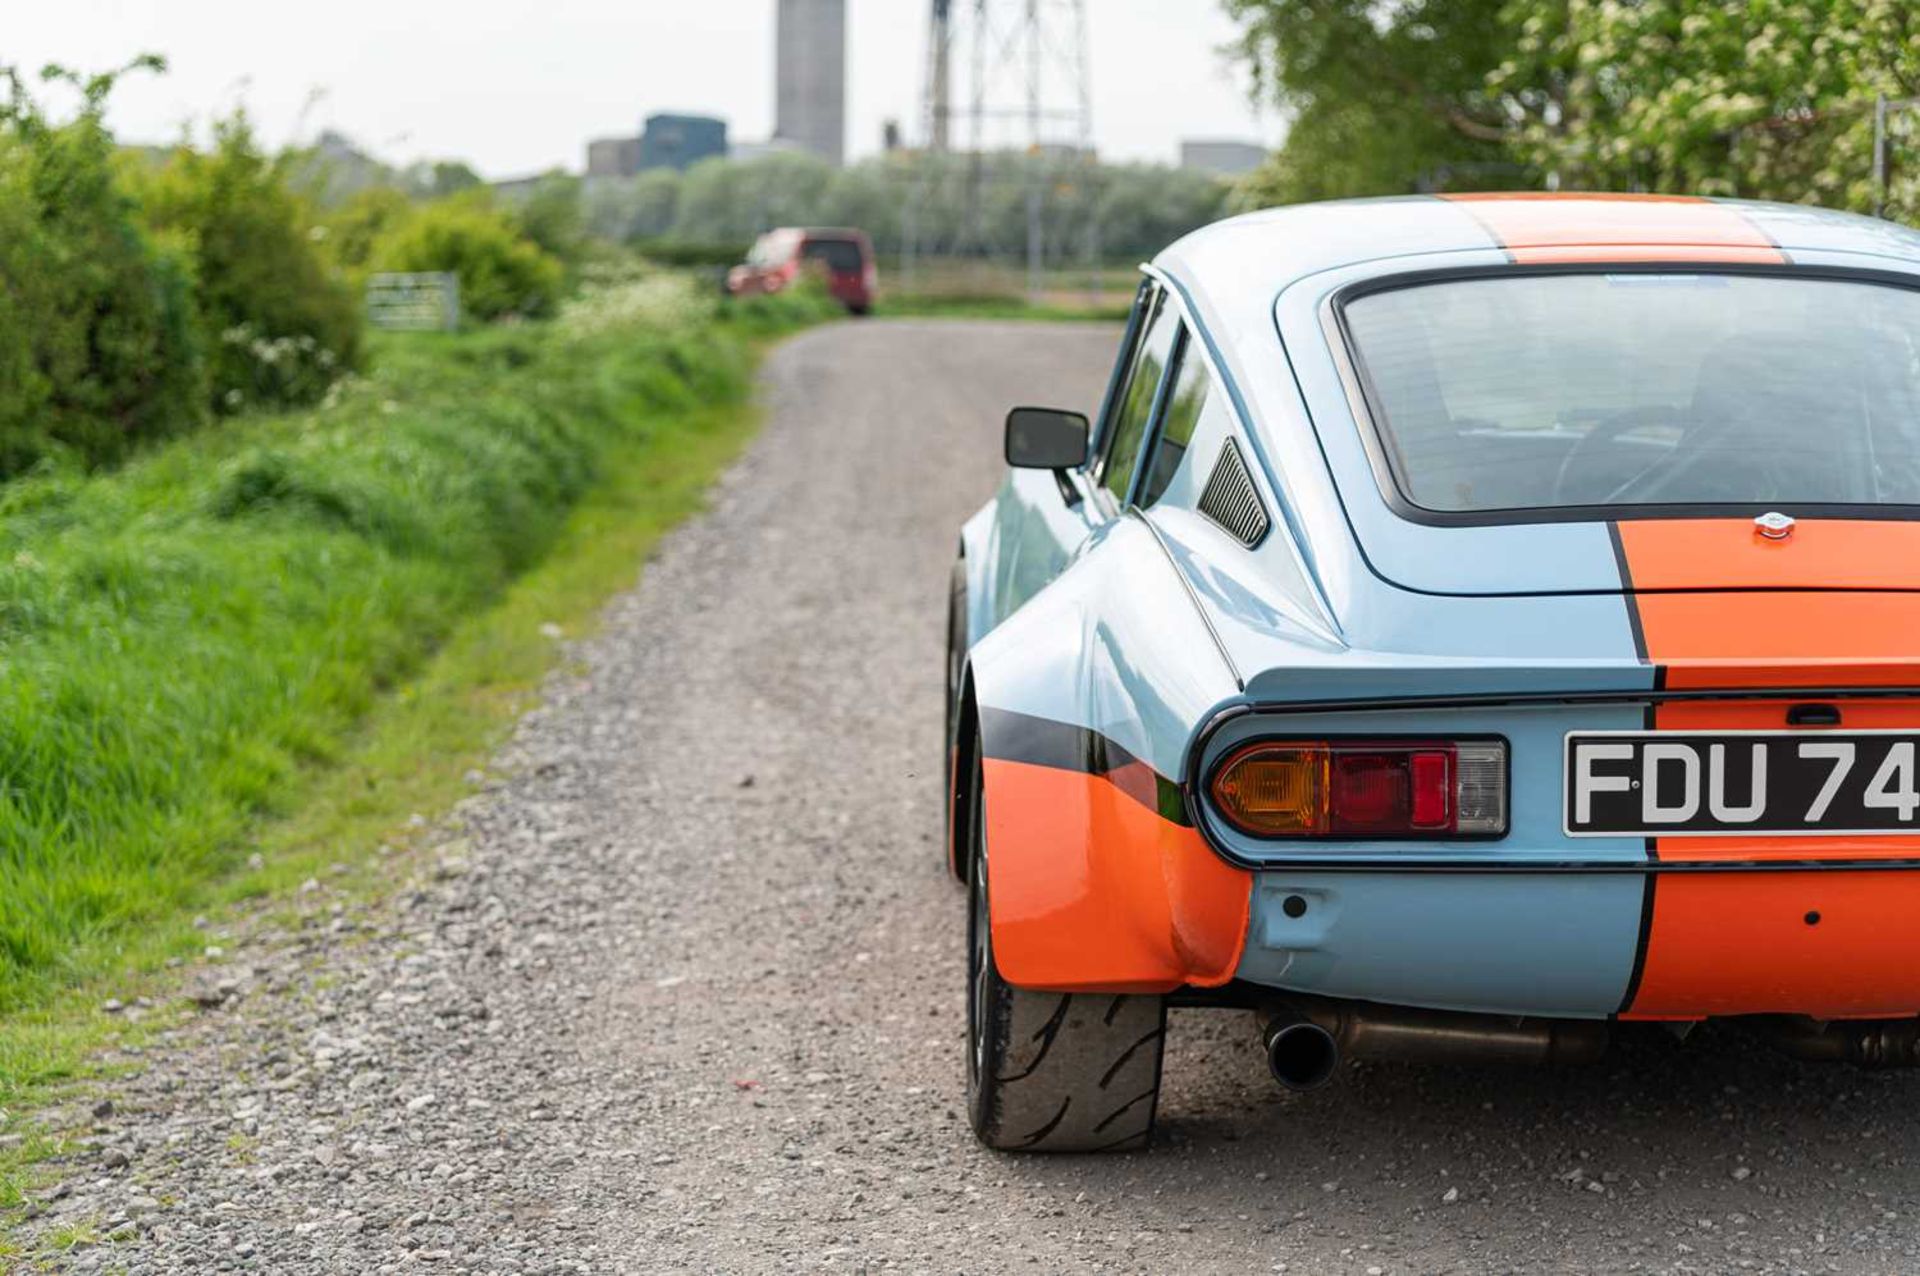 1973 Triumph GT6  ***NO RESERVE*** Presented in Gulf Racing-inspired paintwork, road-going track wea - Image 10 of 65